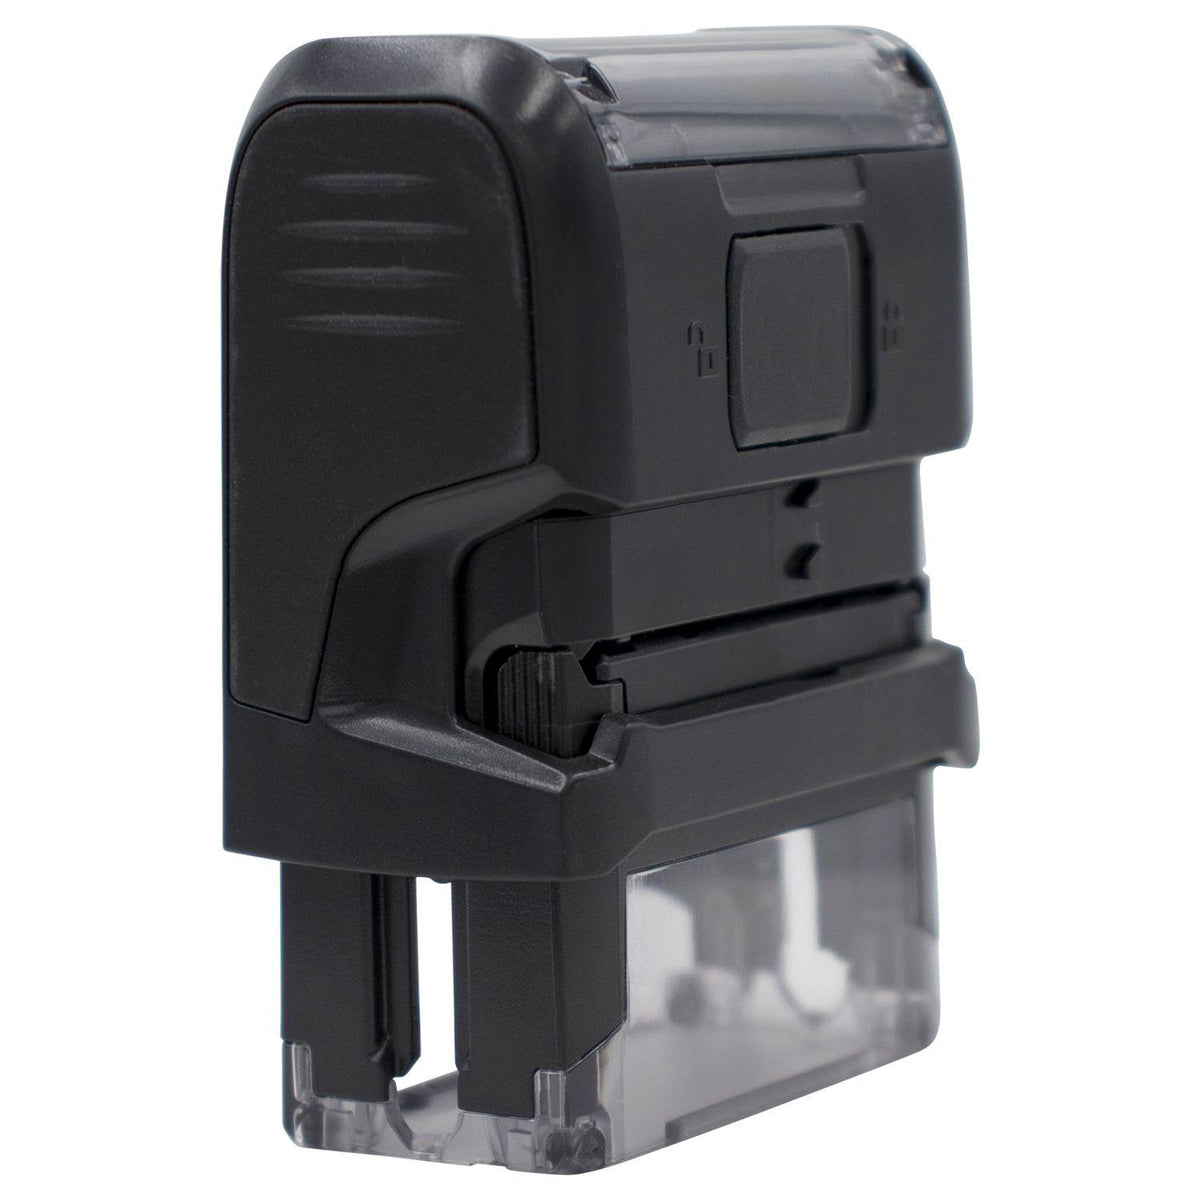 Large Self Inking No Referral Needed Stamp - Engineer Seal Stamps - Brand_Trodat, Impression Size_Large, Stamp Type_Self-Inking Stamp, Type of Use_Medical Office, Type of Use_Professional